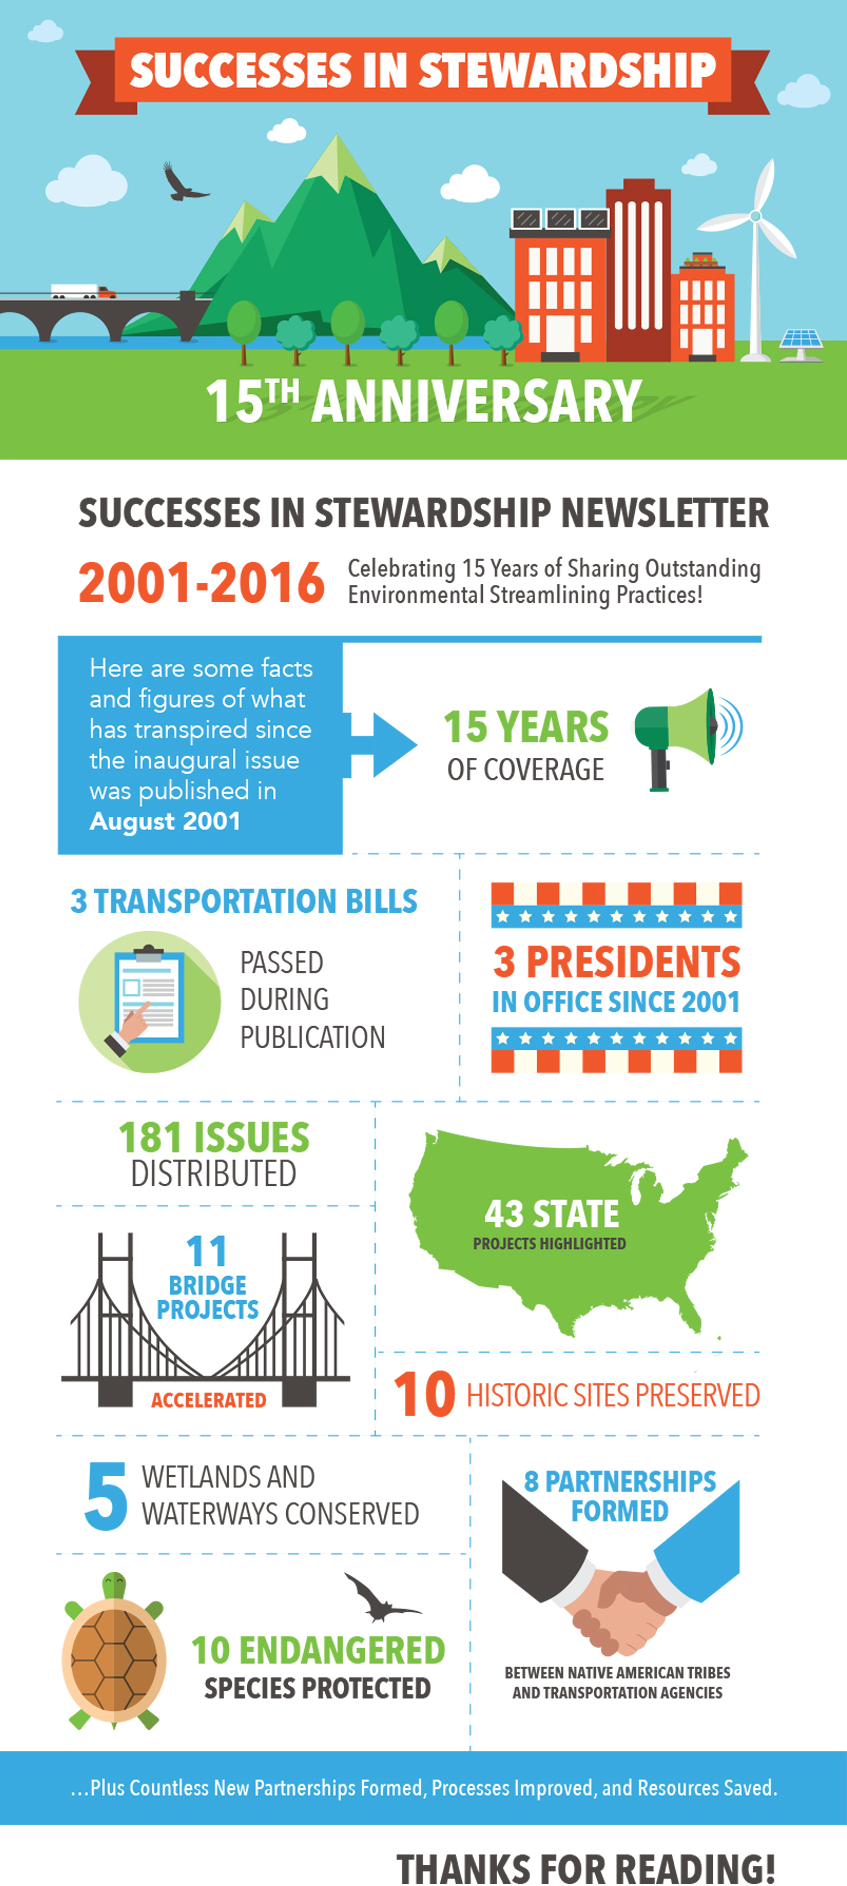 Successes in Stewardship Newsletter 15th anniversary infographic: 3 transportation bills passed; 3 presidents in office since 2001; 181 issues distributed; 11 bridge projects accelerated; 43 state projects highlighted; 10 historic sites preserved; 5 wetlands and waterways conserved; 10 endangered species protected; and 8 partnerships formed between Native American Tribes and transportation agencies